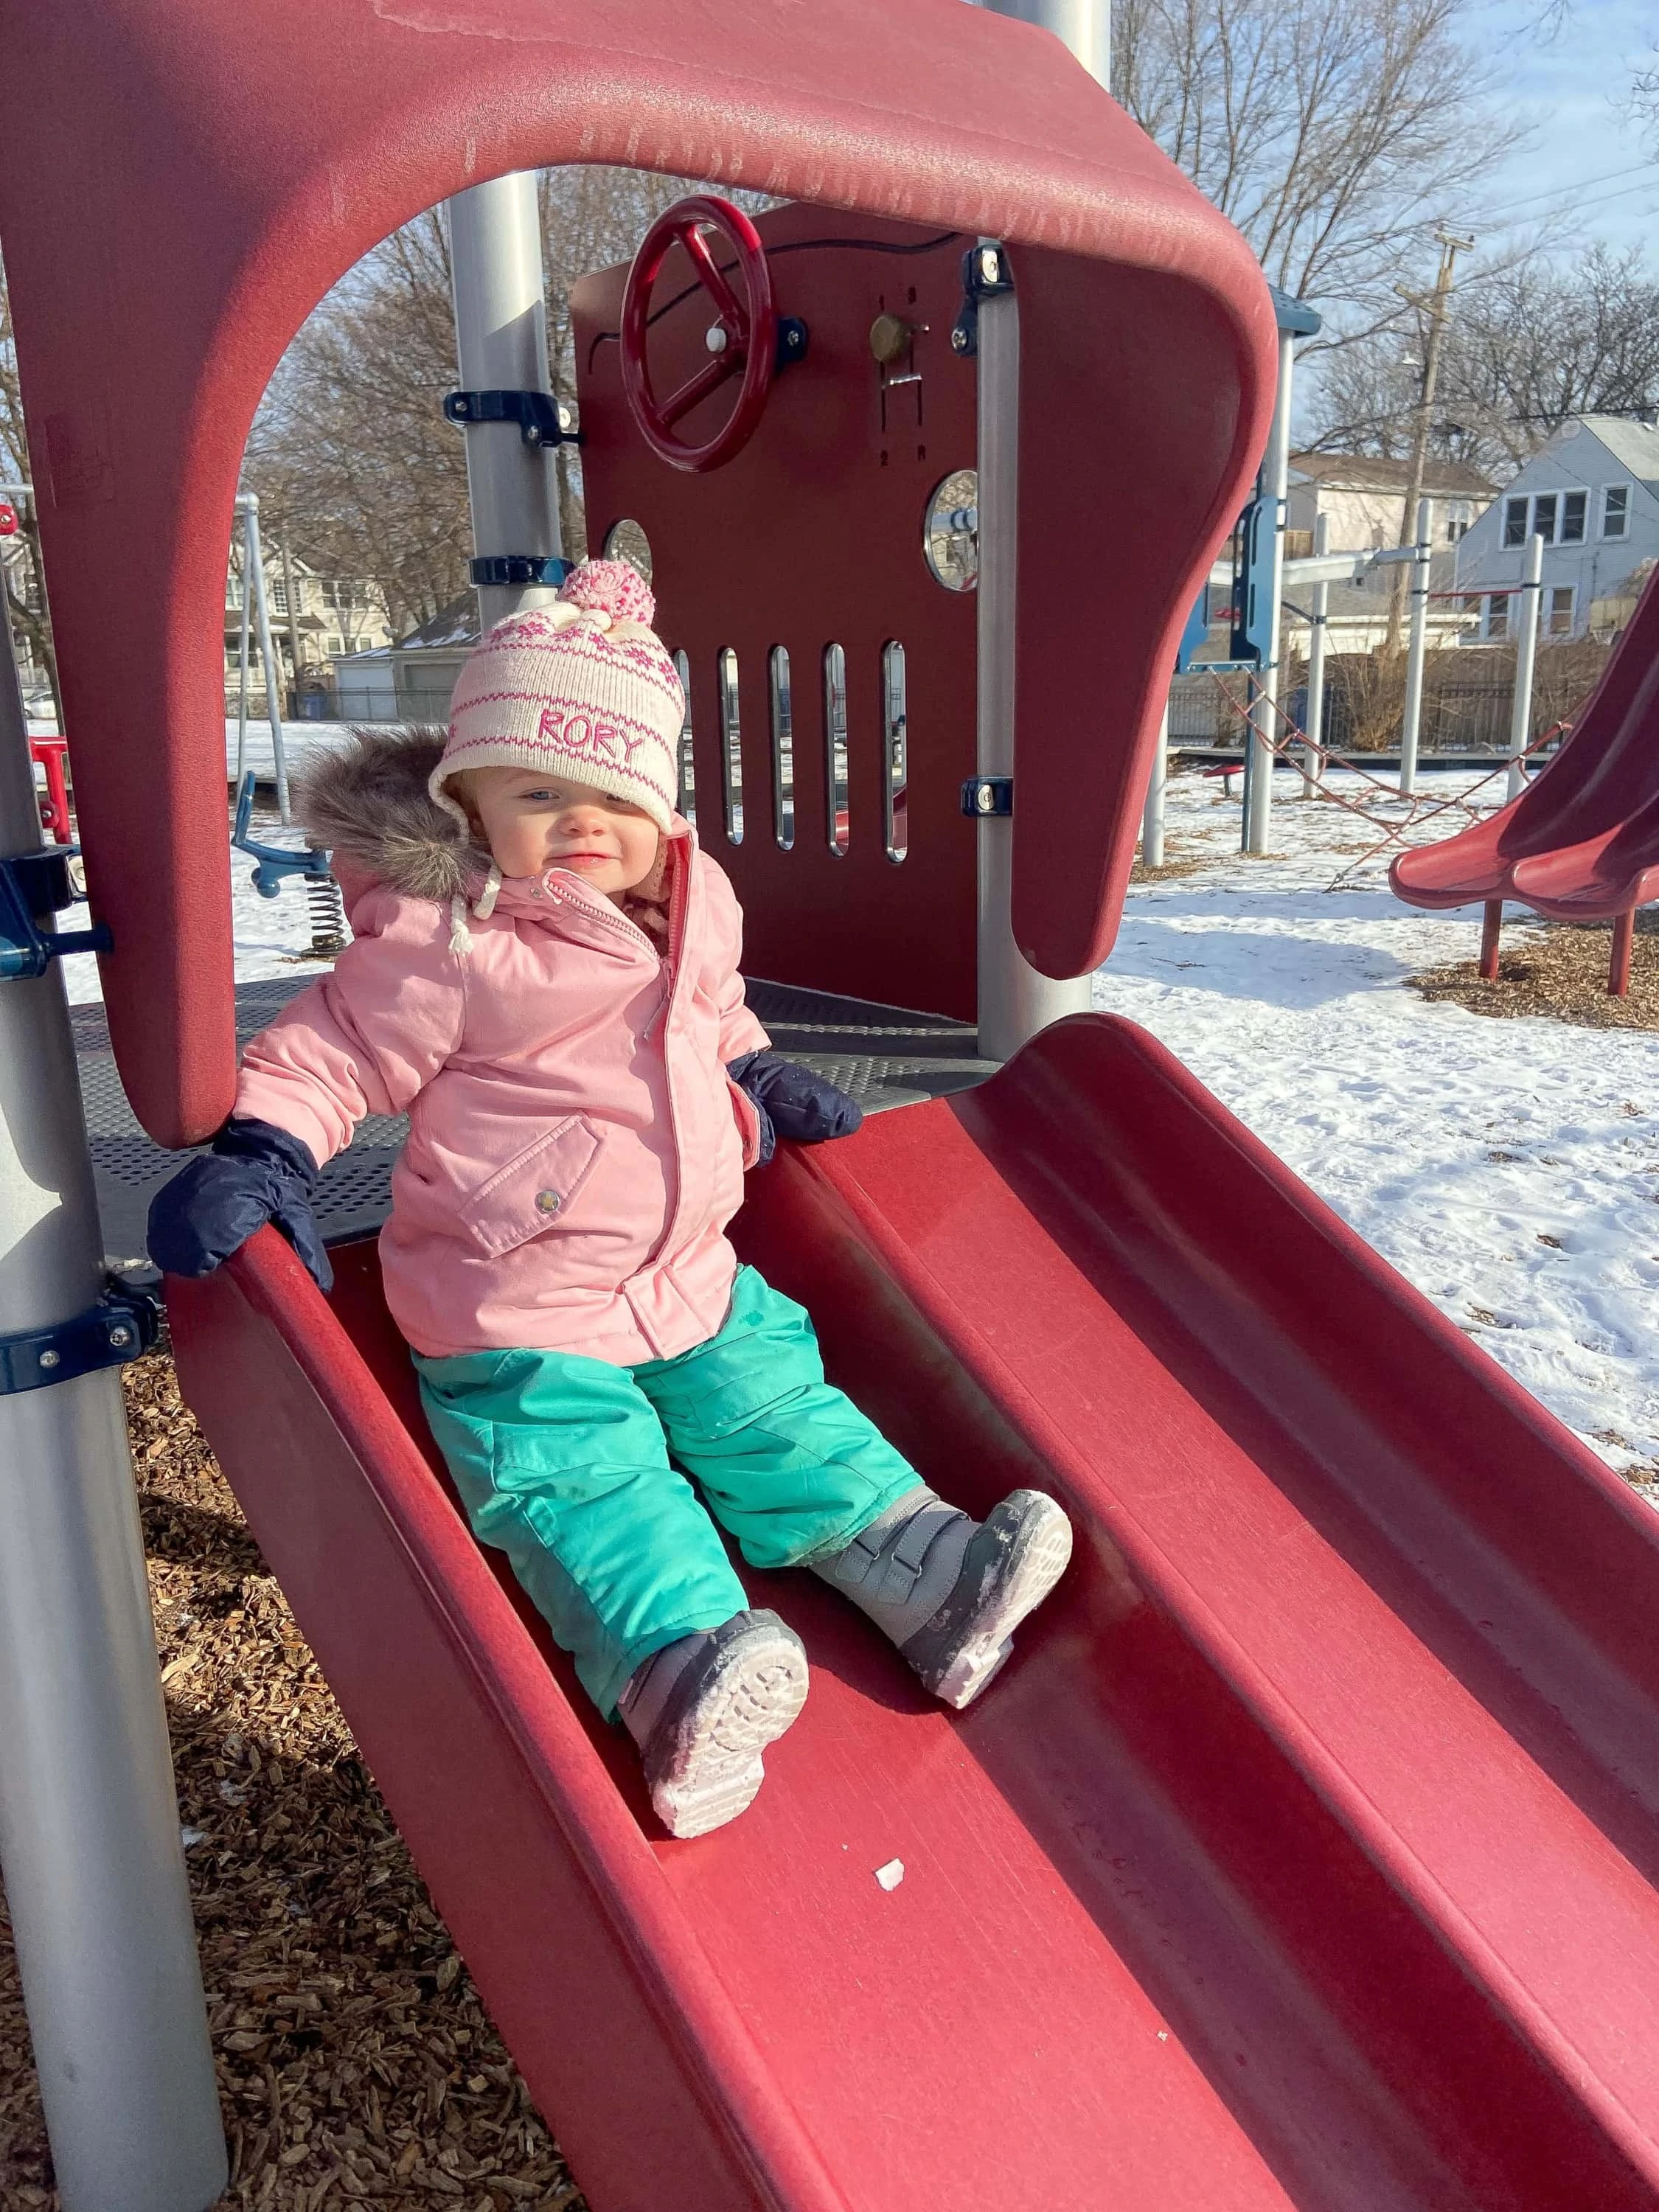 January 2022 - rory going to down the slide at the park